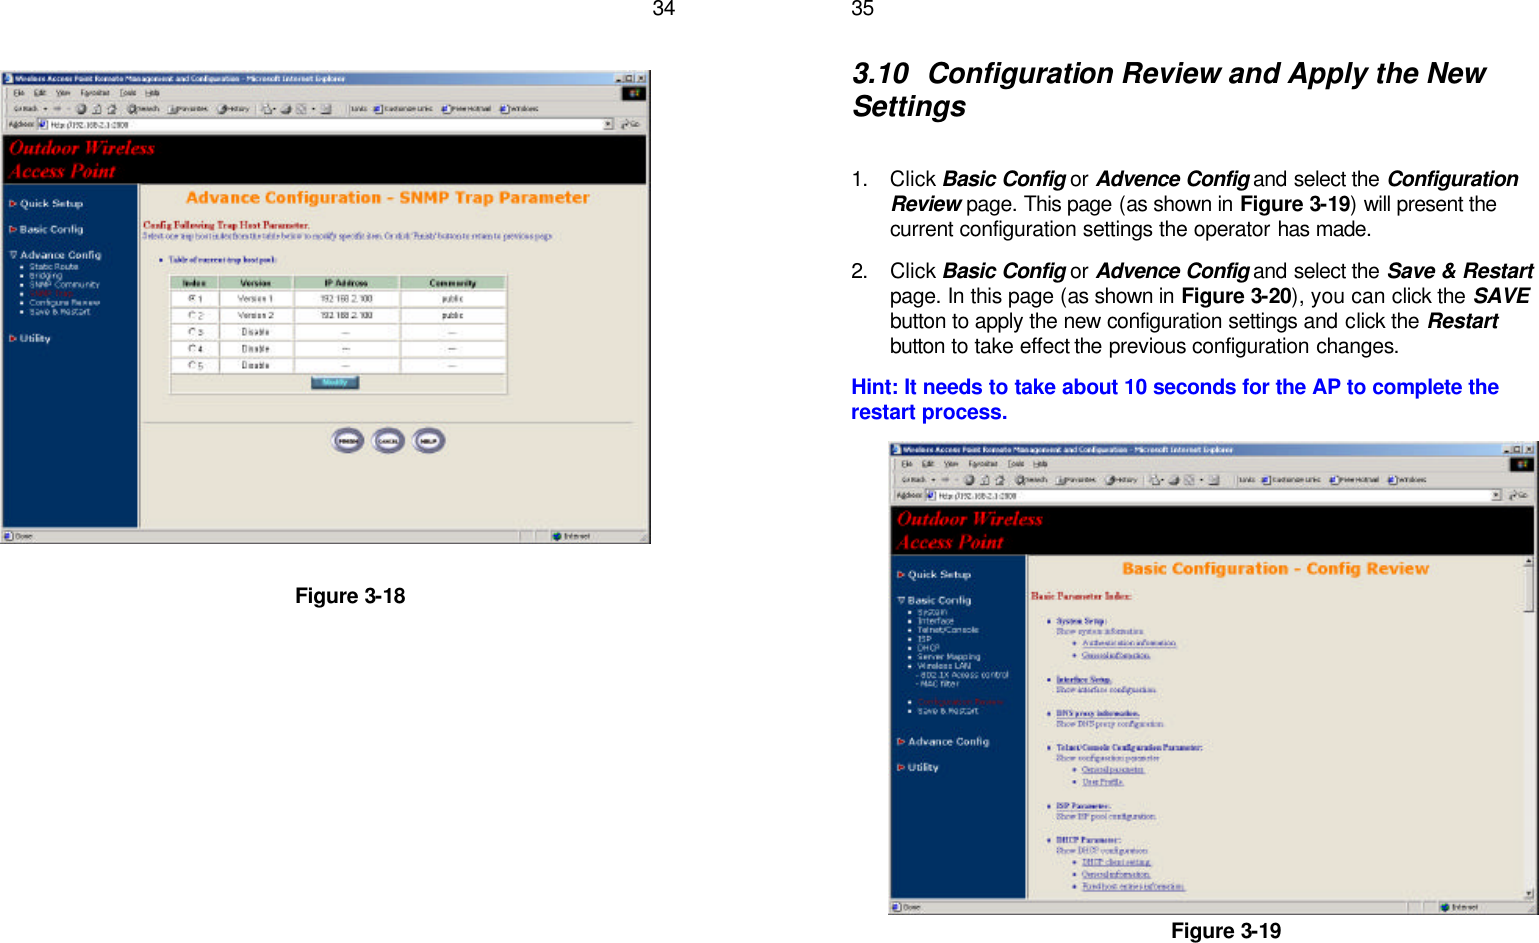   34                      Figure 3-18    353.10 Configuration Review and Apply the New Settings  1. Click Basic Config or Advence Config and select the Configuration Review page. This page (as shown in Figure 3-19) will present the current configuration settings the operator has made. 2. Click Basic Config or Advence Config and select the Save &amp; Restart page. In this page (as shown in Figure 3-20), you can click the SAVE button to apply the new configuration settings and click the Restart button to take effect the previous configuration changes. Hint: It needs to take about 10 seconds for the AP to complete the restart process.                Figure 3-19   